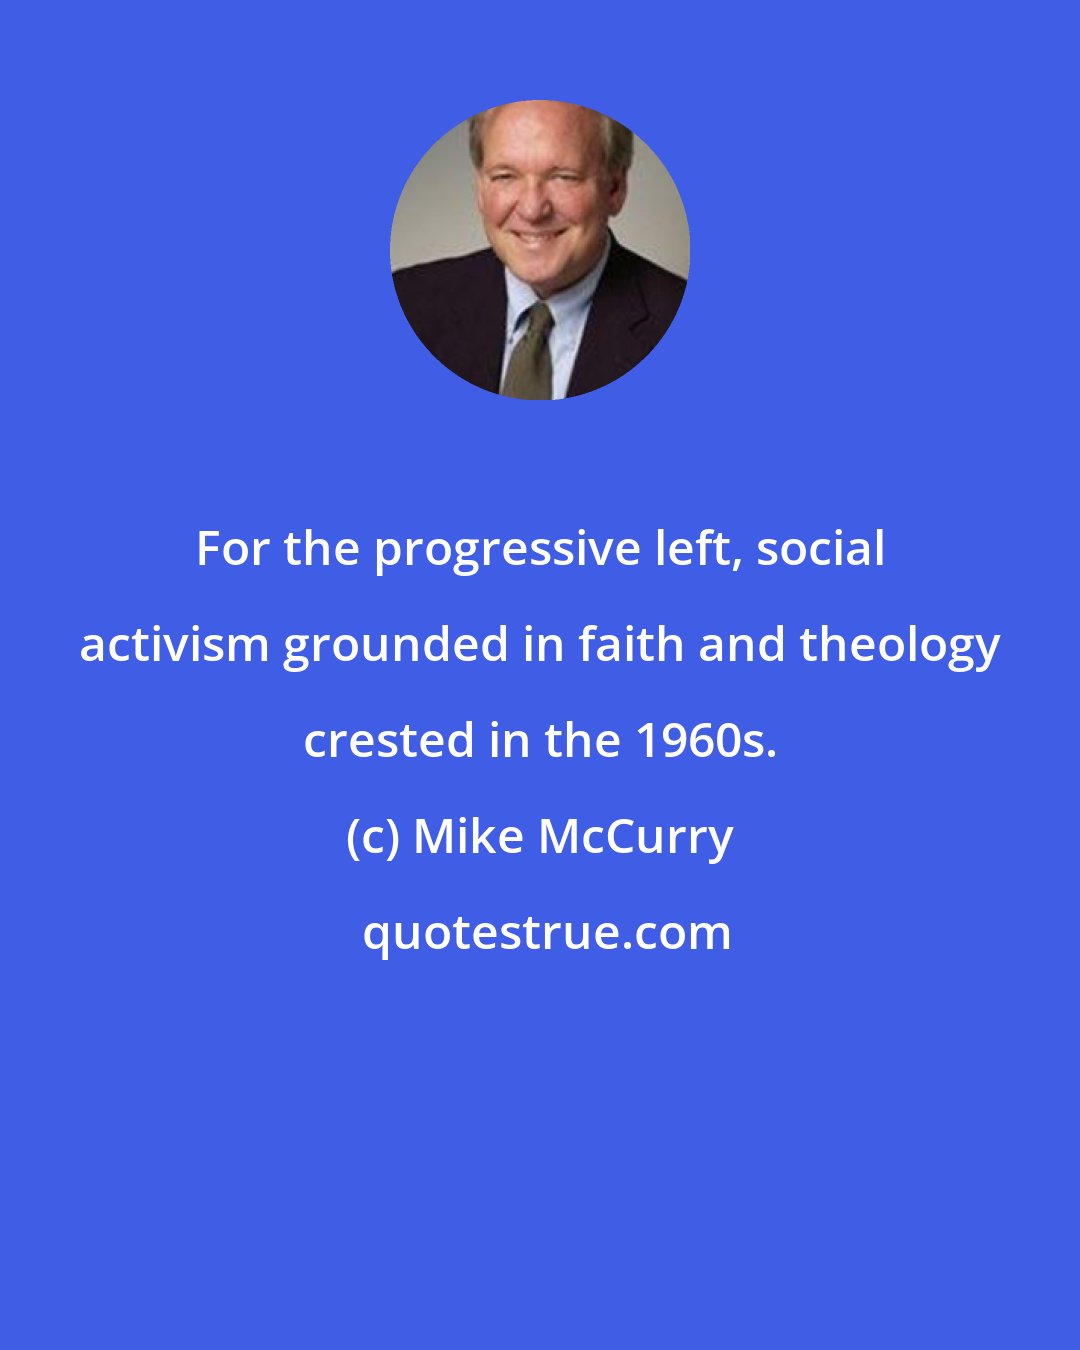 Mike McCurry: For the progressive left, social activism grounded in faith and theology crested in the 1960s.